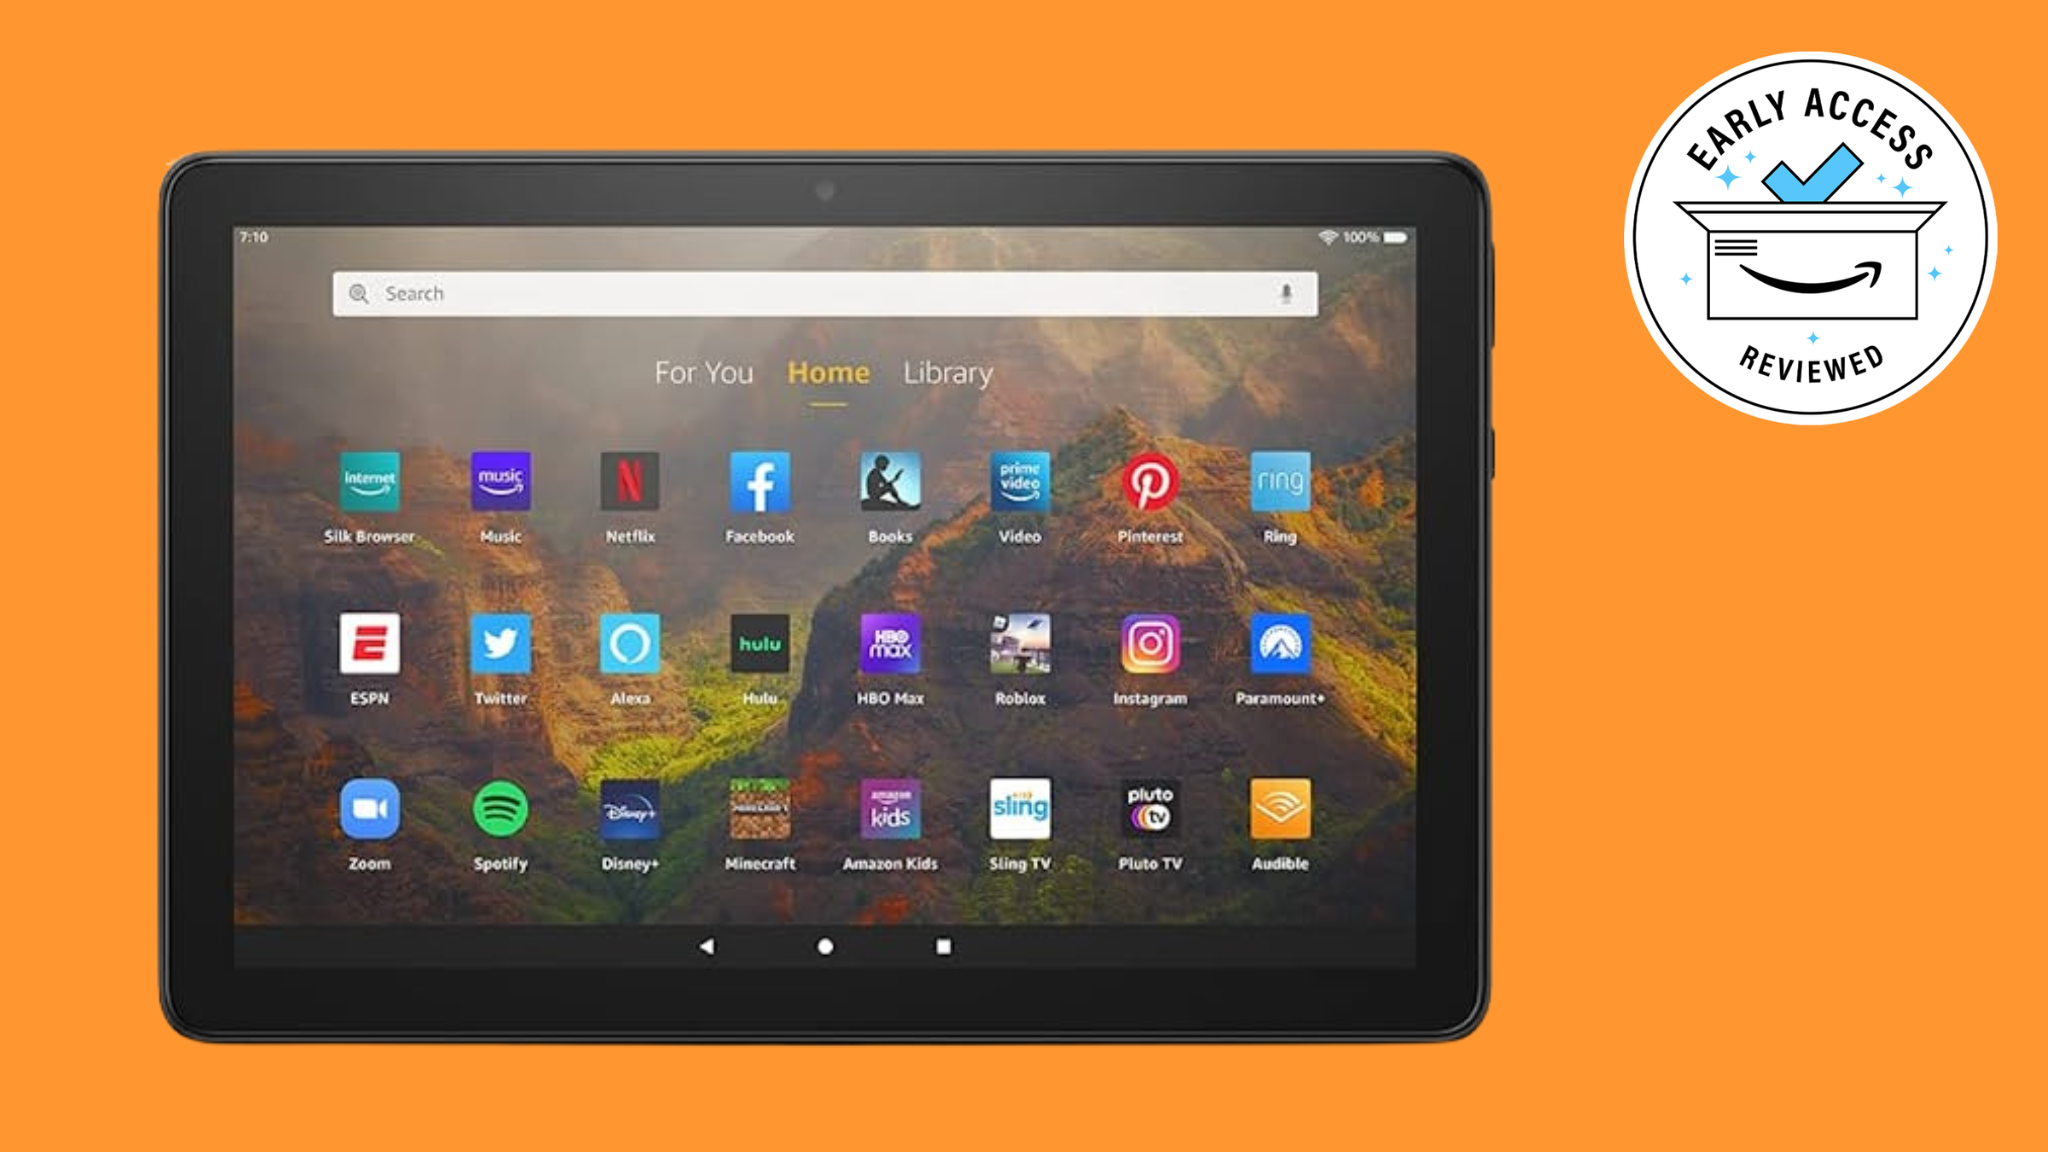 Amazon Prime deals: Get the Amazon Fire HD 10 tablet for 50% off